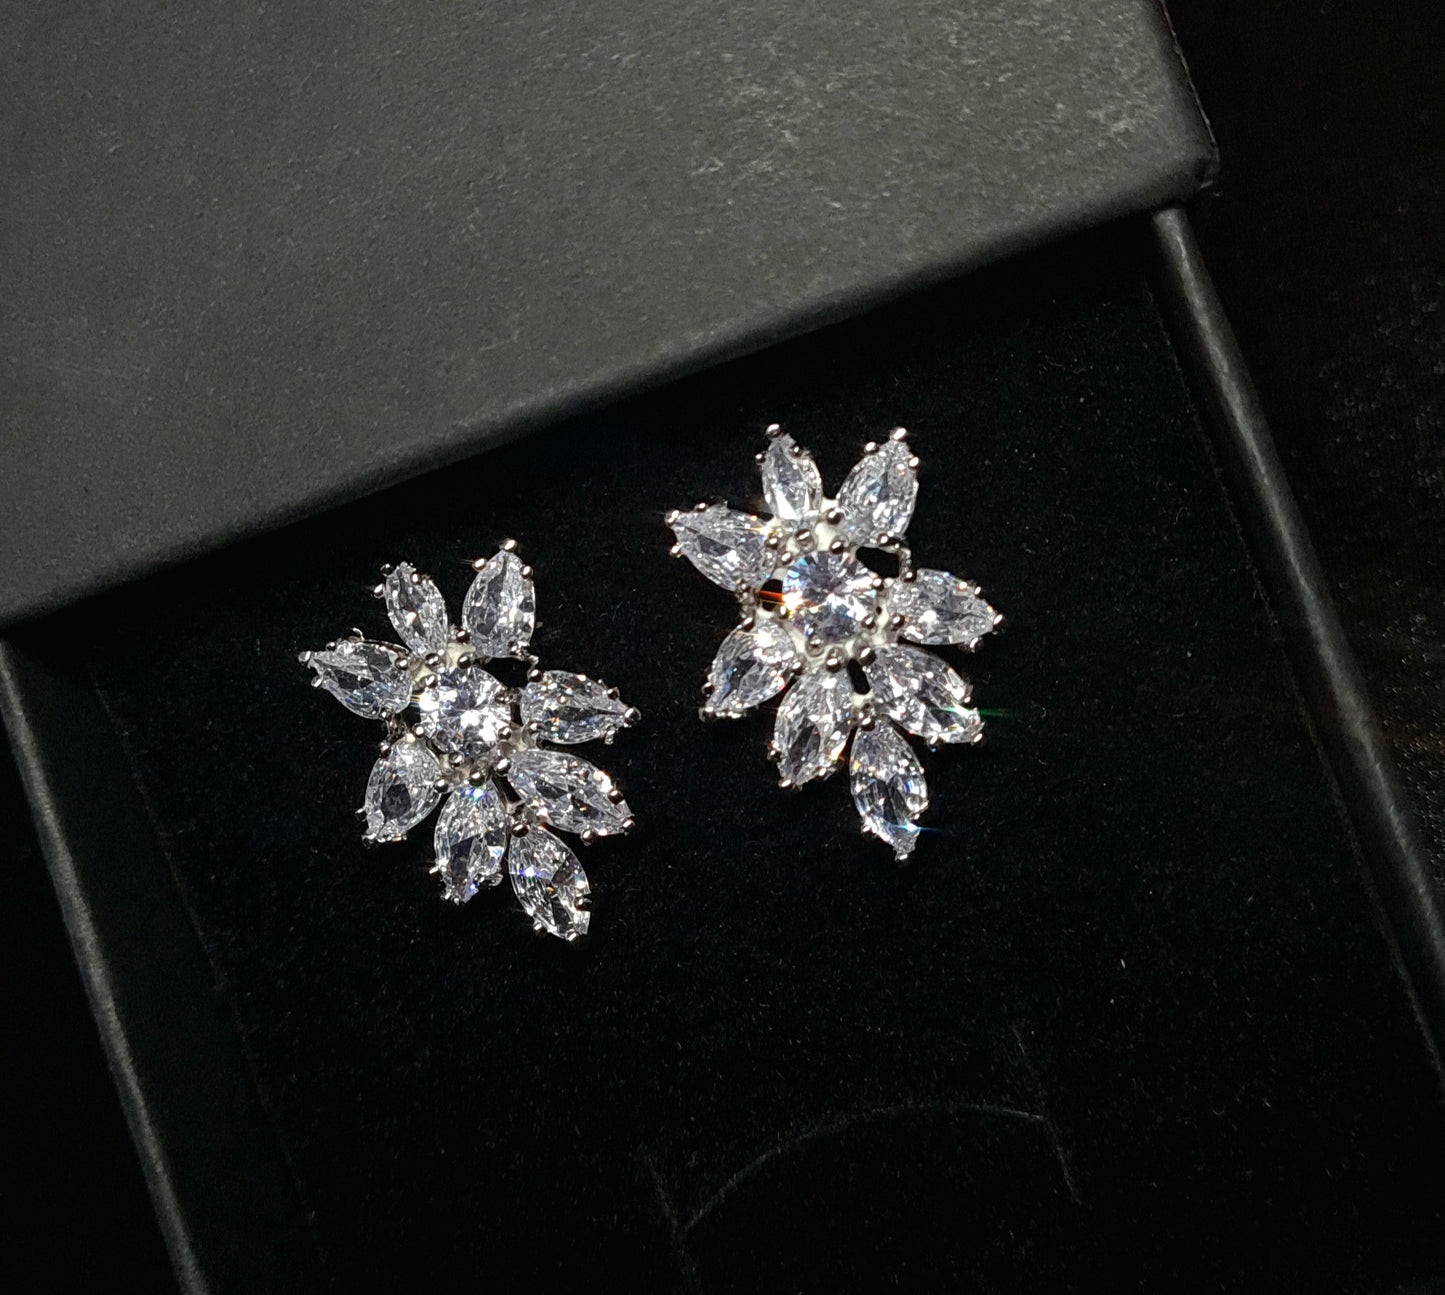 A pair of earrings in the shape of a flower, made from cubic zirconia stones. The earrings are sitting on a black surface. The flower is about 2.6 cm and is made up of petals that are clear and sparkling. The center of the flower is a large cubic zirconia stone.